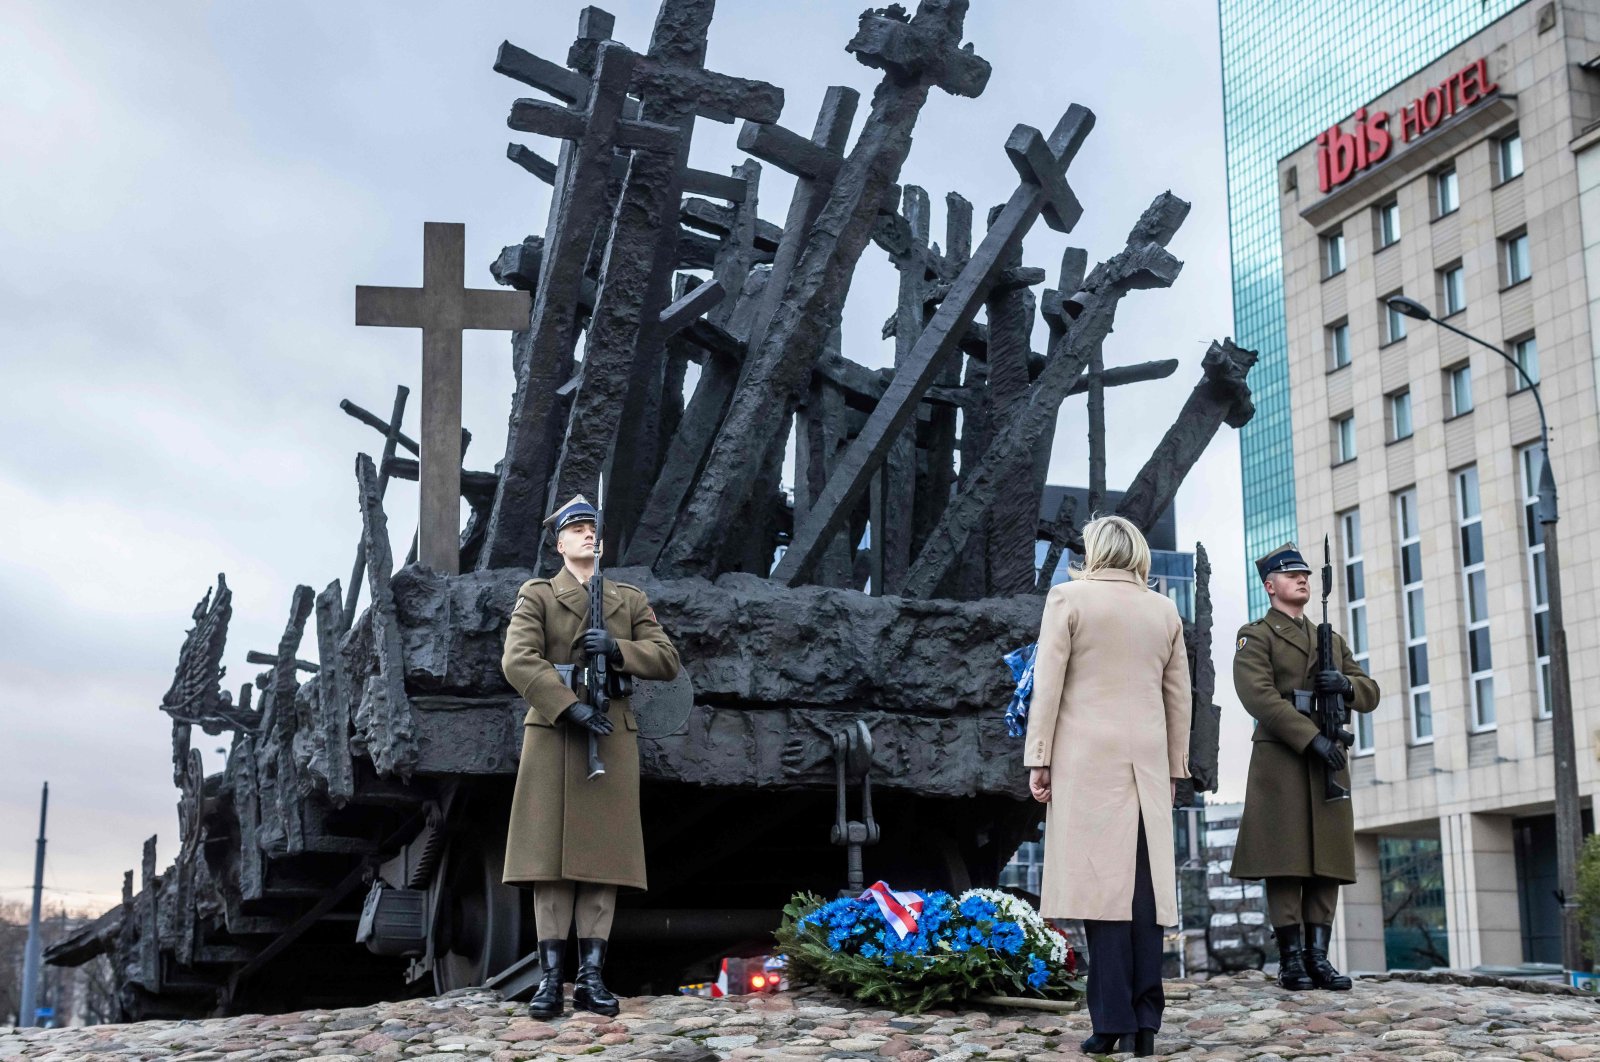 Leader of French far-right party Rassemblement National (RN) and candidate for the French presidential elections Marine Le Pen (C) takes part in a wreath-laying ceremony in front of the Monument to the Fallen and Murdered in the East commemorating victims of Soviet invasion on 1939 in Warsaw, Poland, Dec. 3, 2021. (AFP Photo)